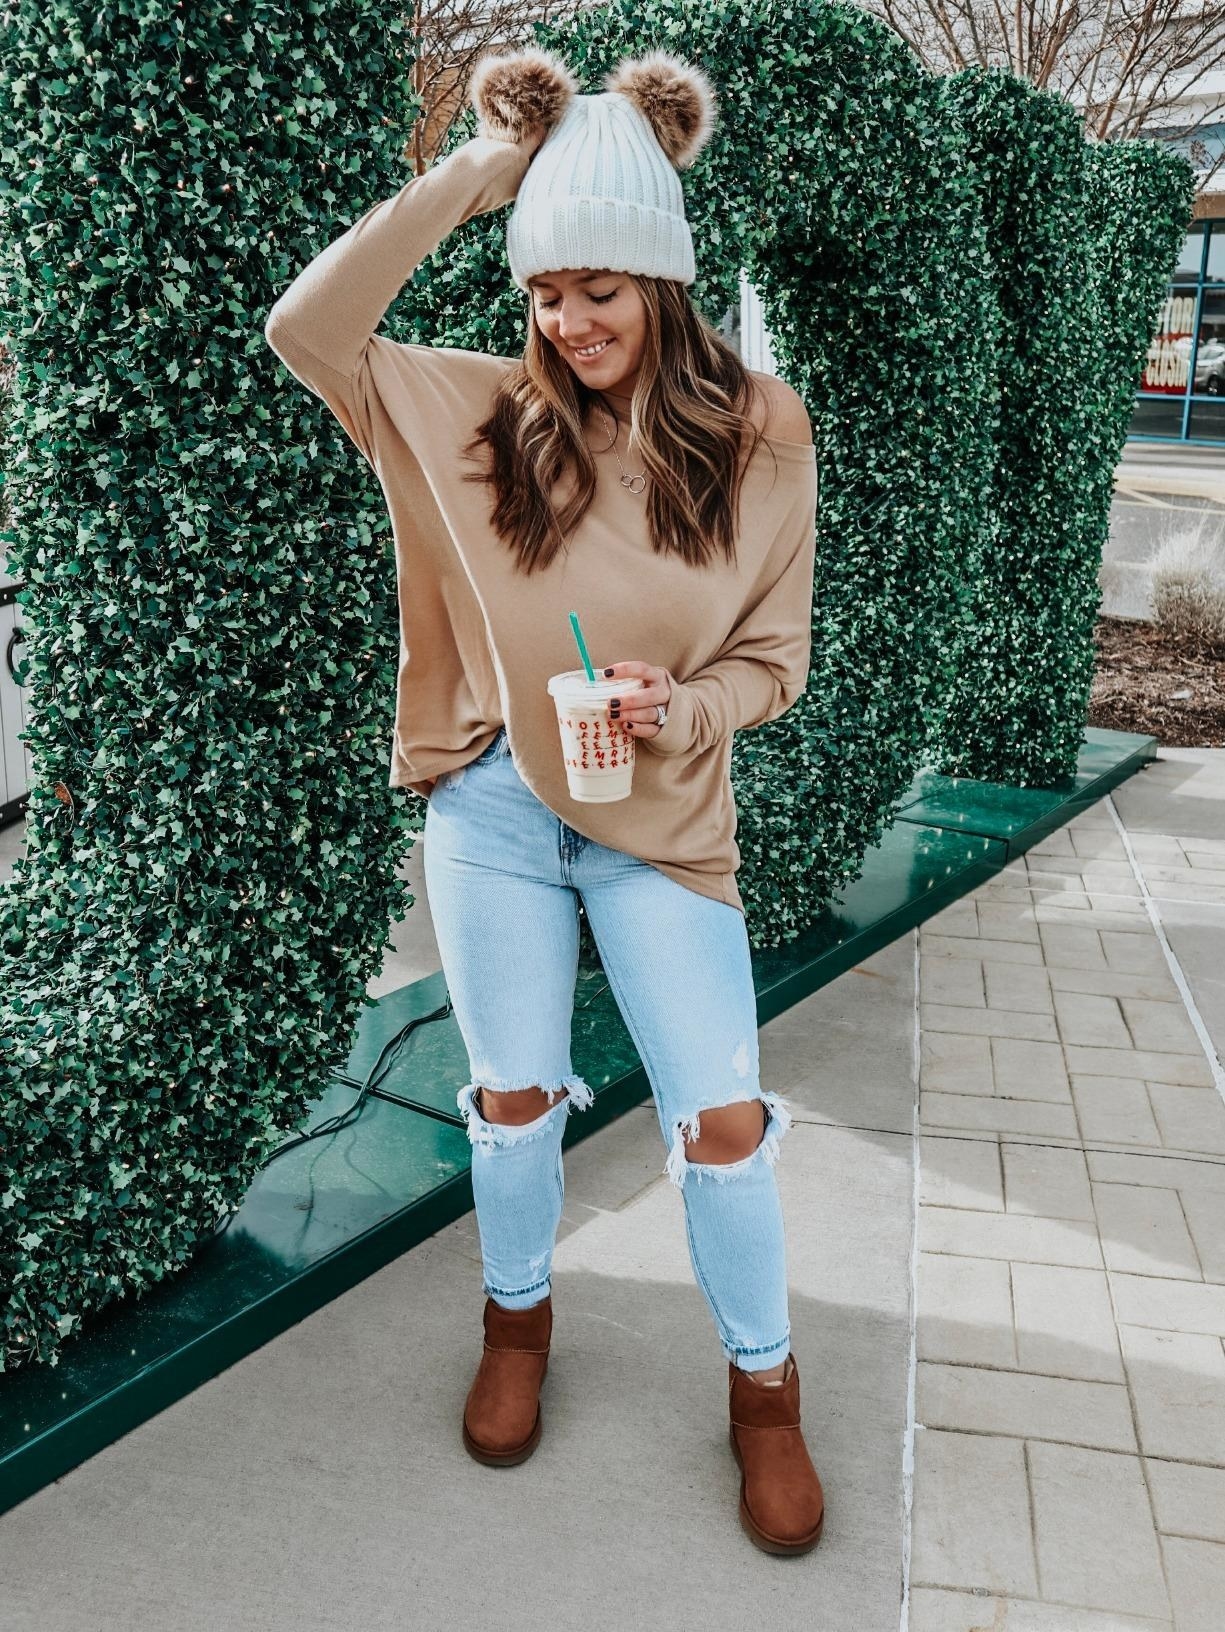 32 Pieces Of Winter Clothing From Amazon That Look So Good On (And We ...